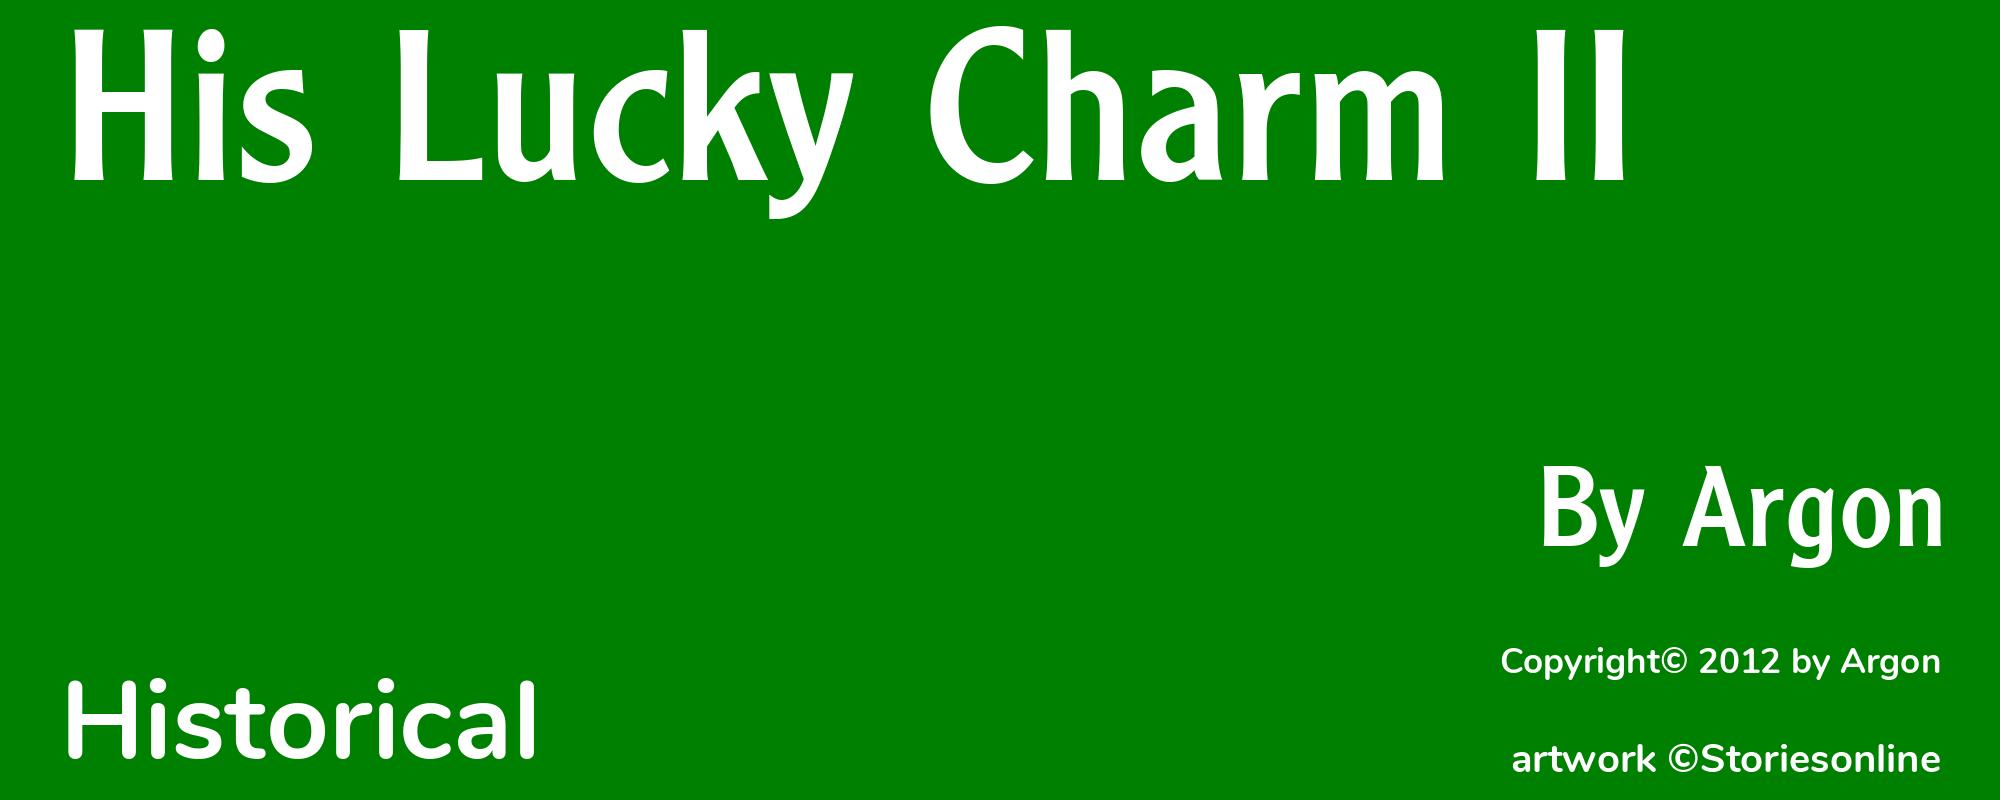 His Lucky Charm II - Cover